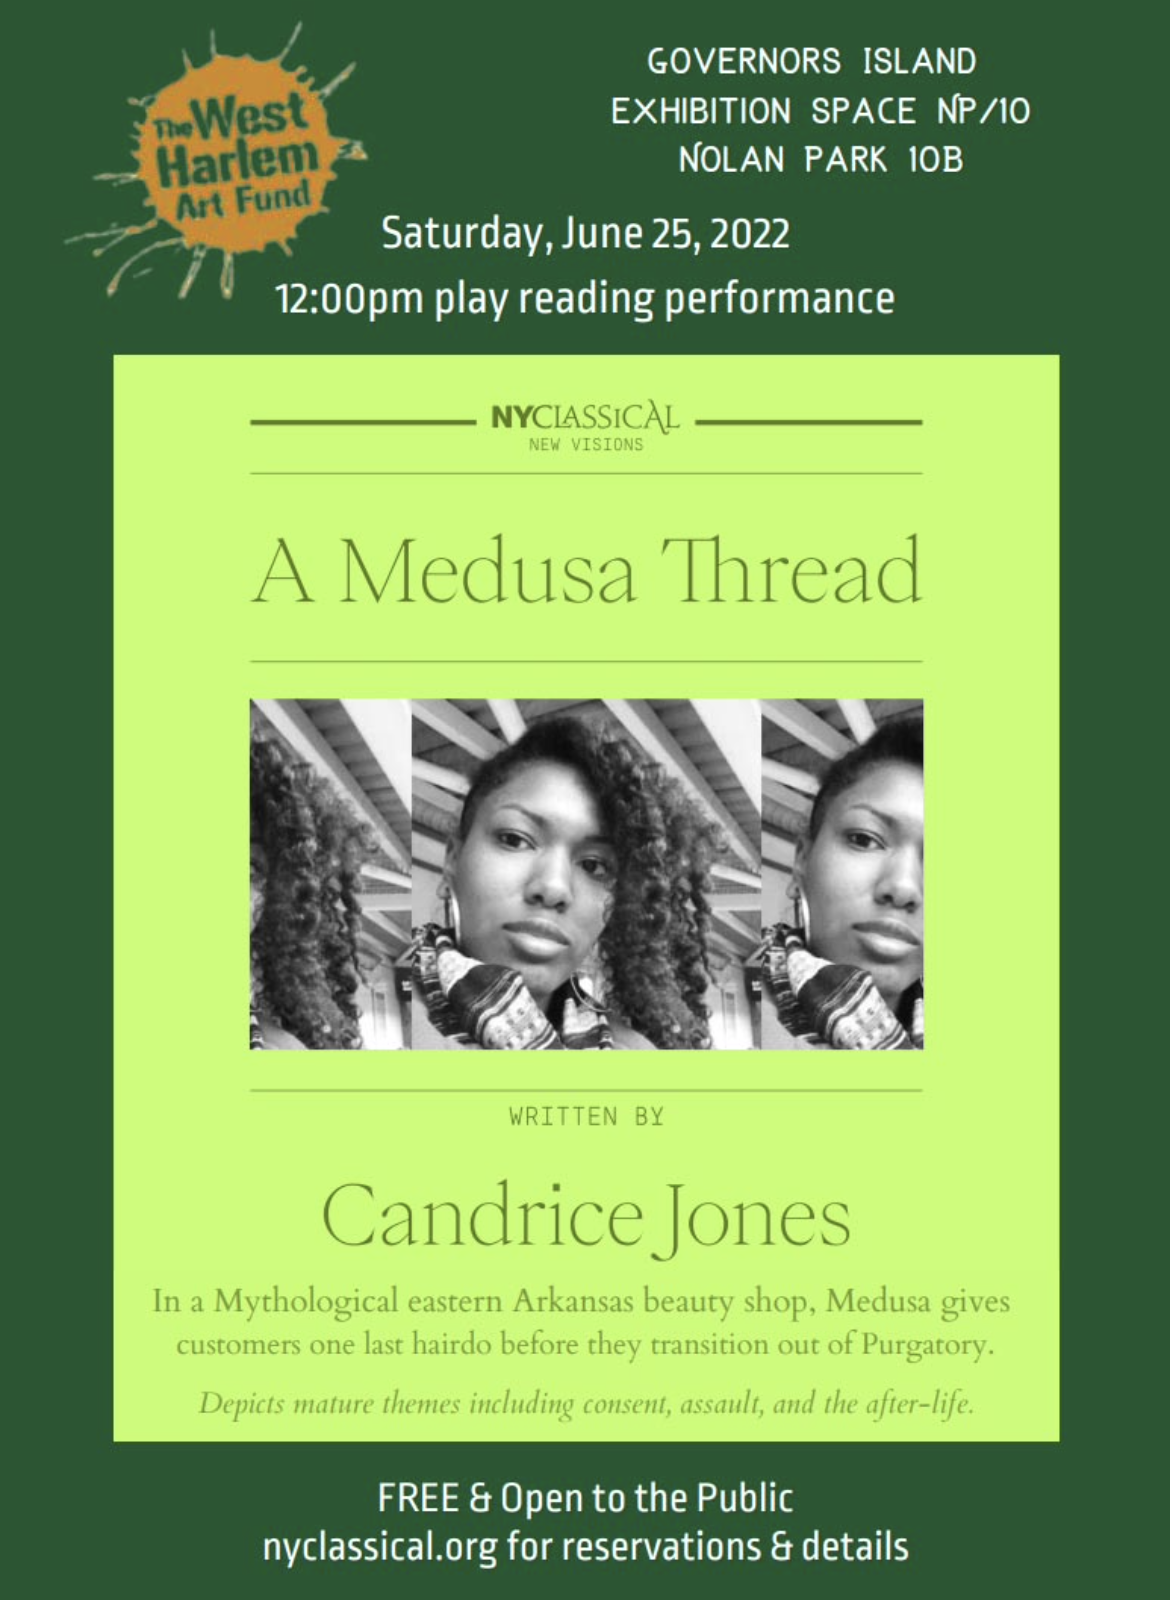 announcement of play reading in NYC for Candrice Jones